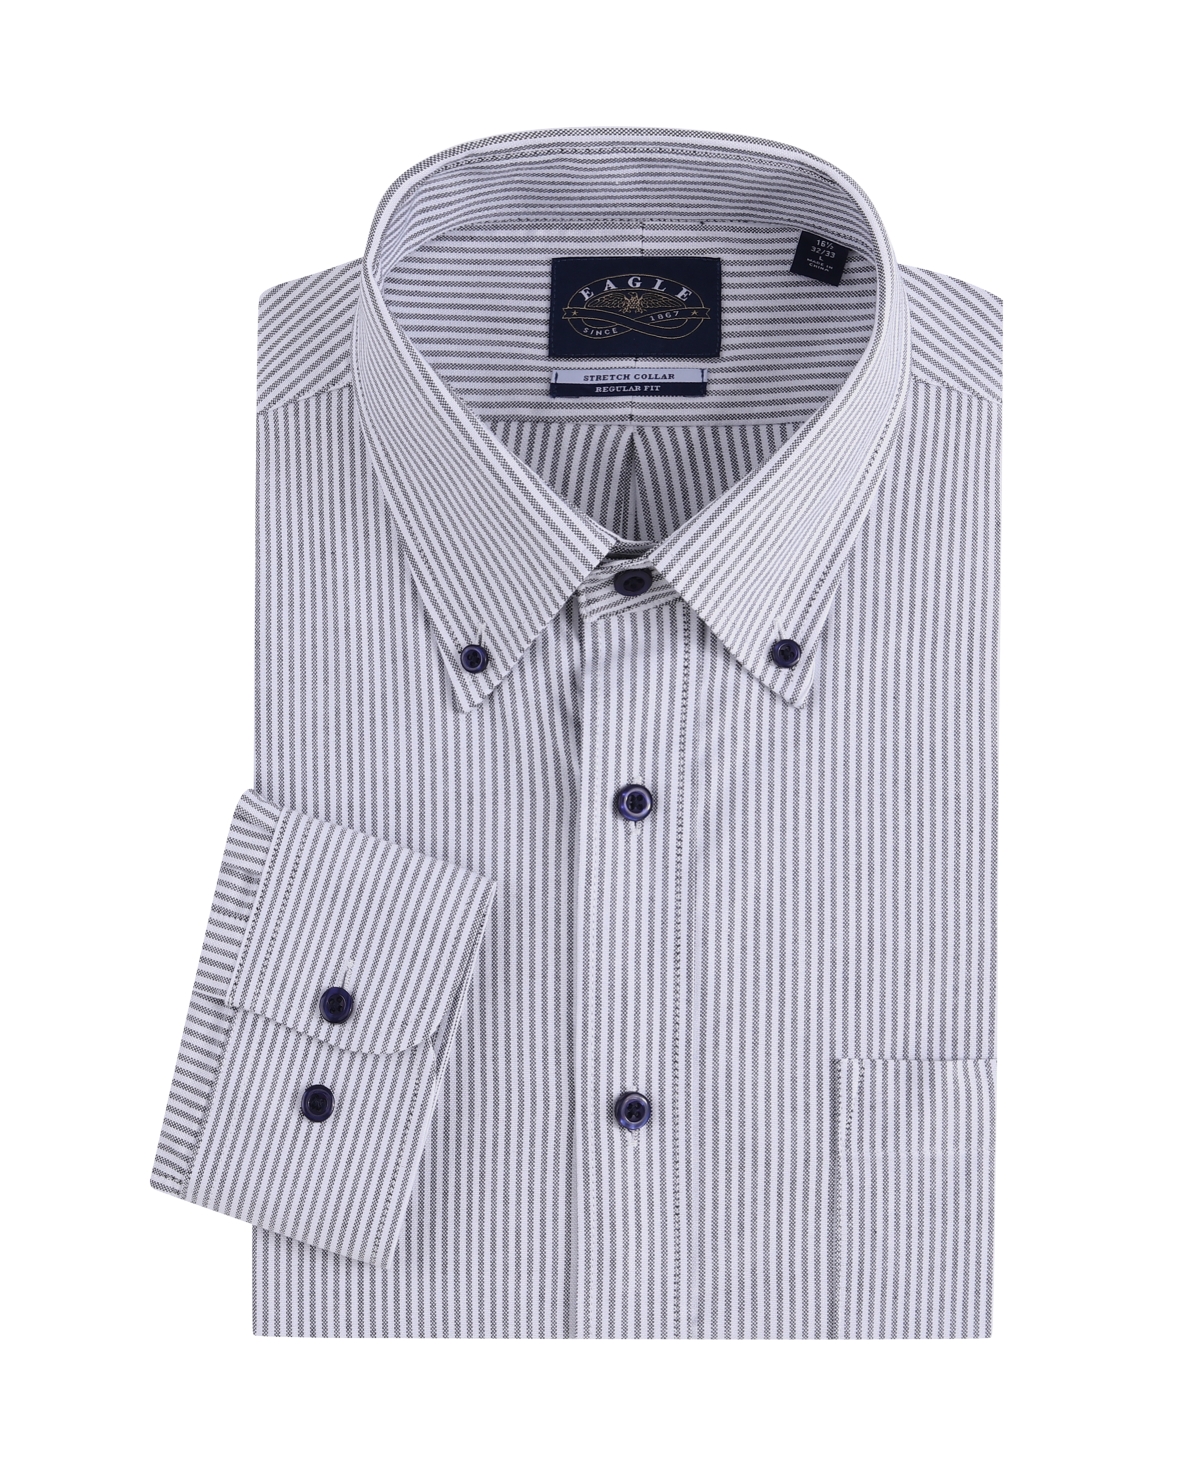 Men's Pin Striped Oxford Shirt with Stretch Collar - Blue